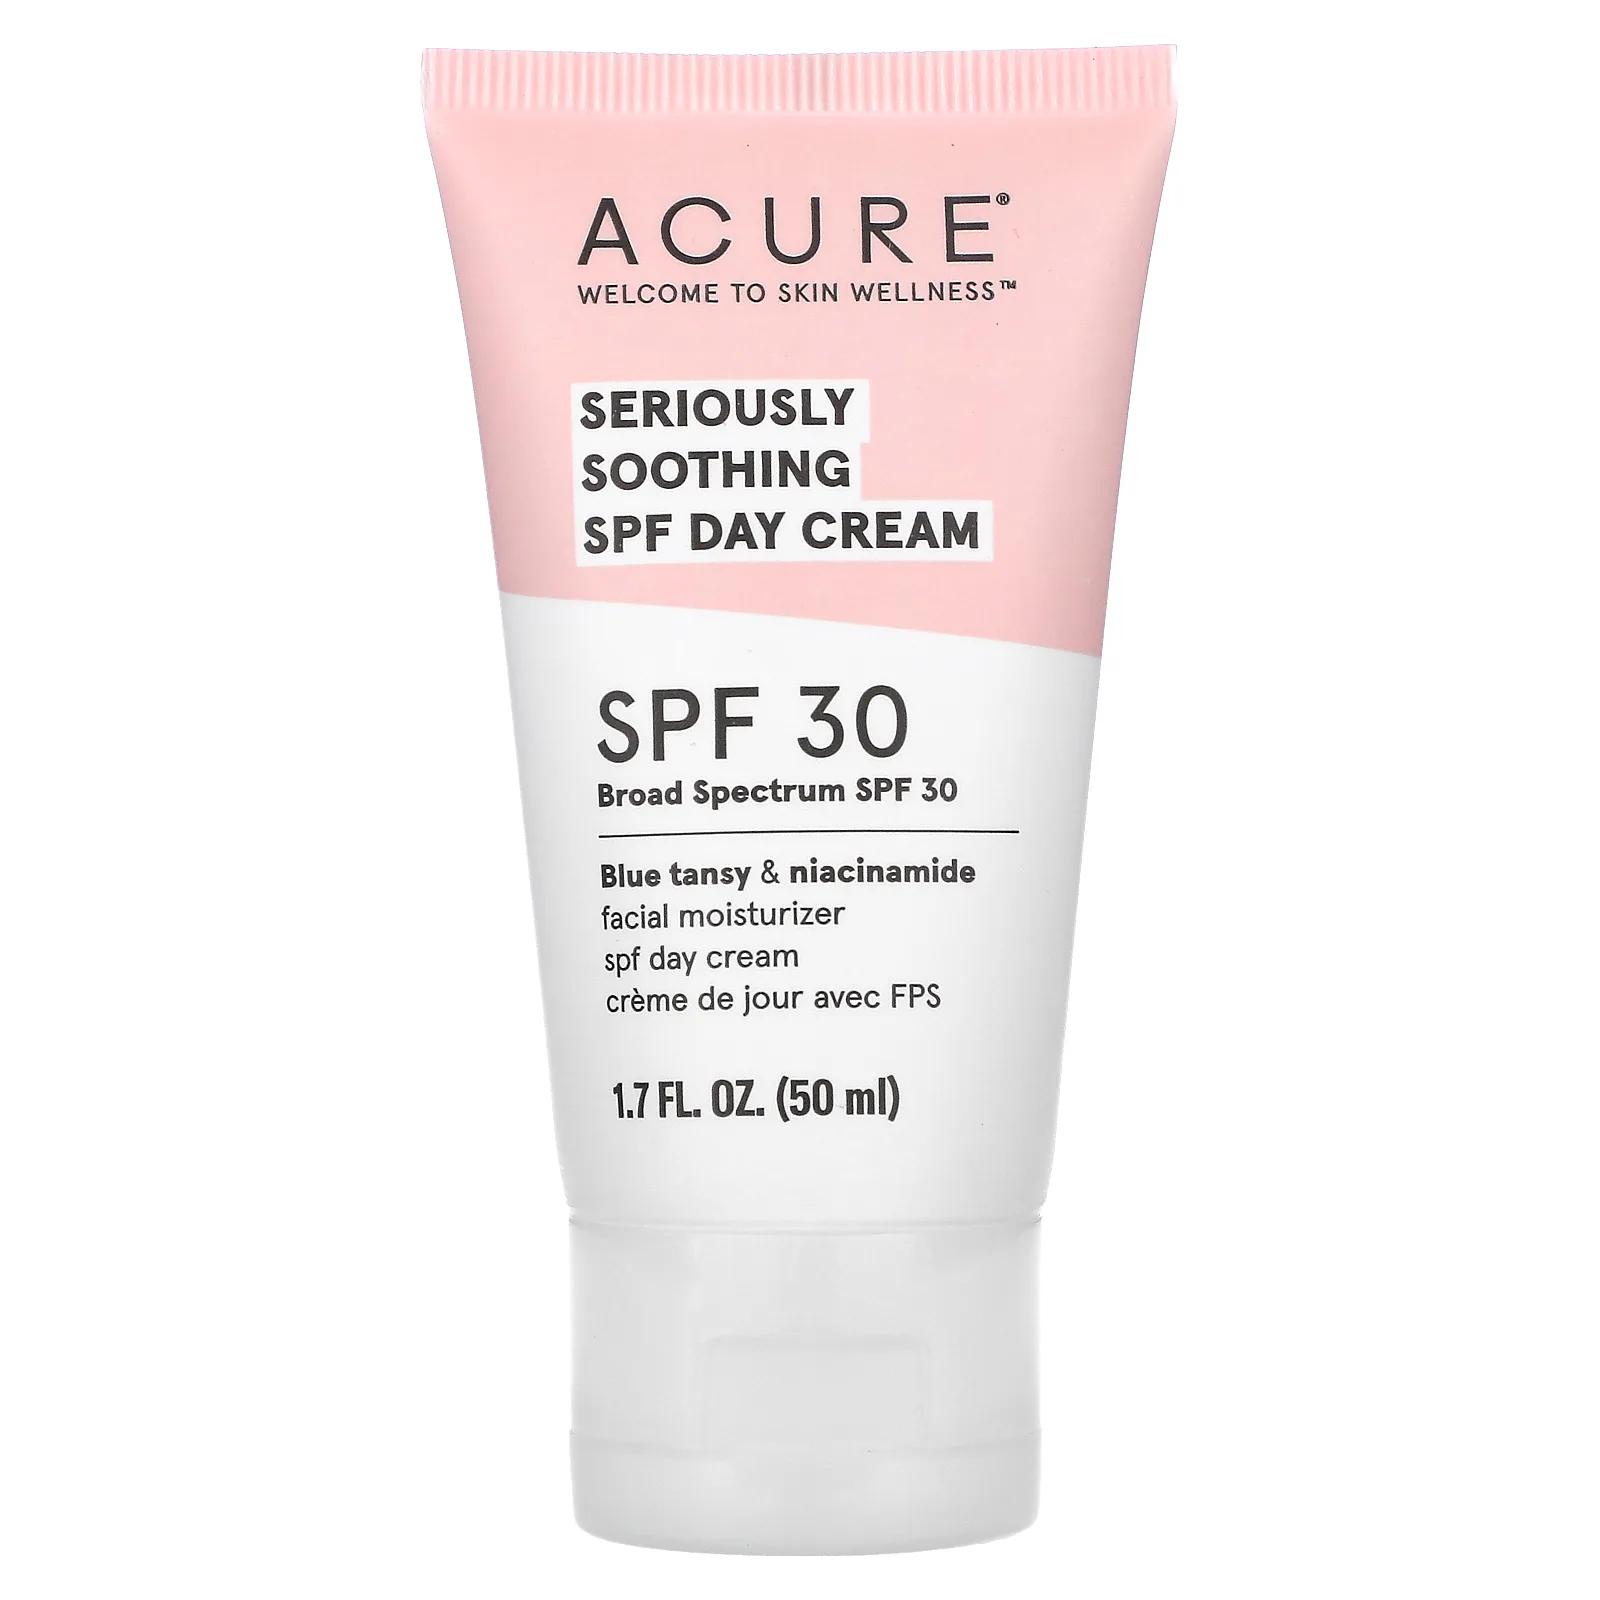 ACURE Seriously Soothing дневной крем с SPF SPF 30 50 мл (1,7 жидк. Унции) acure coconut